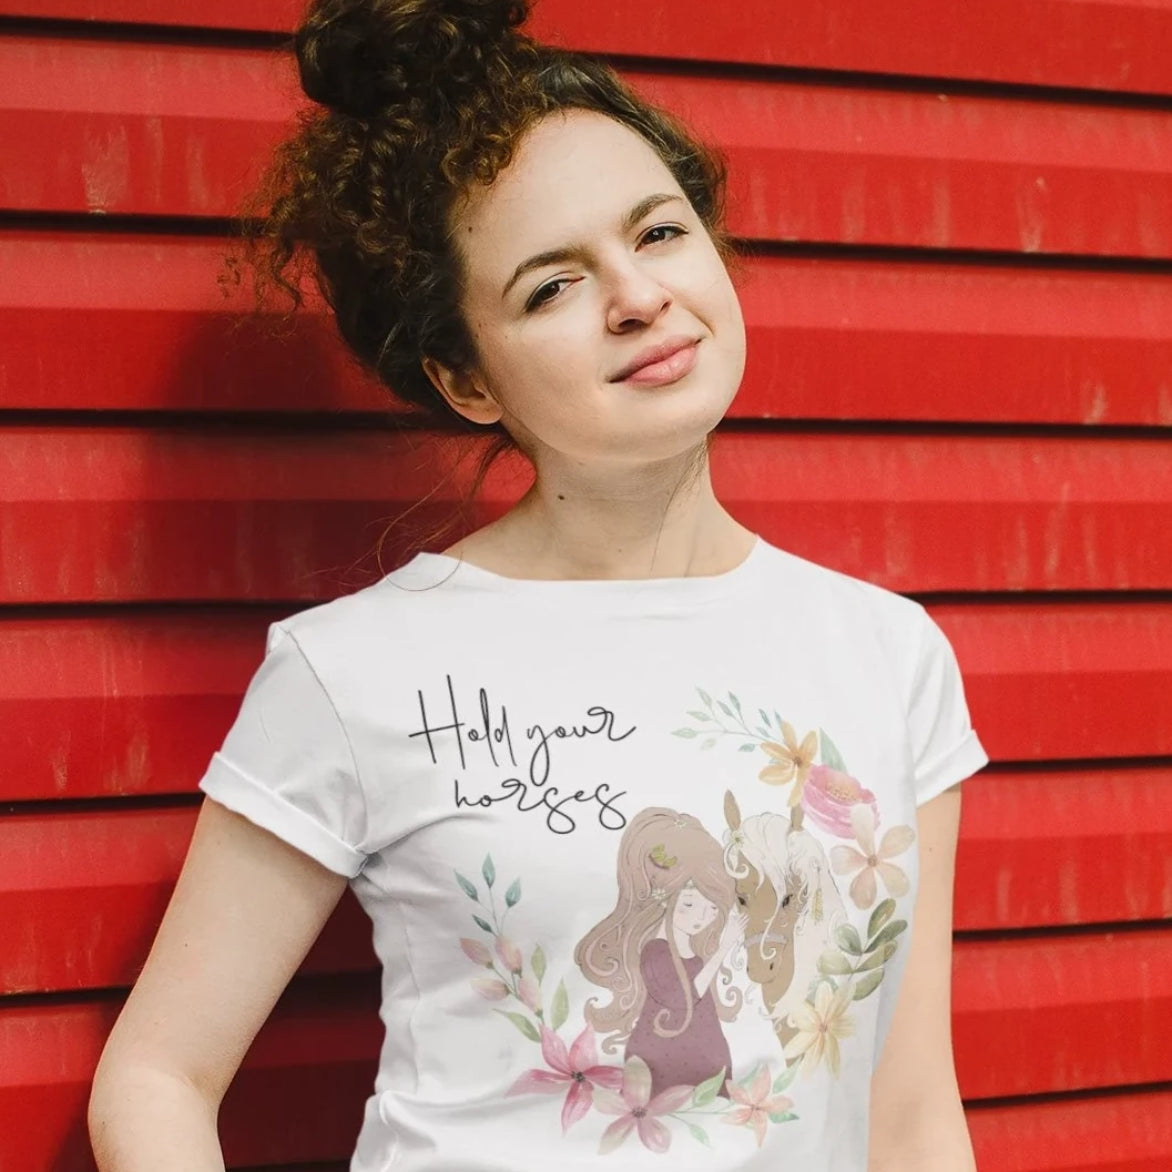 Hold Your Horses T-shirt: A Stylish Reminder to Embrace the Ride!